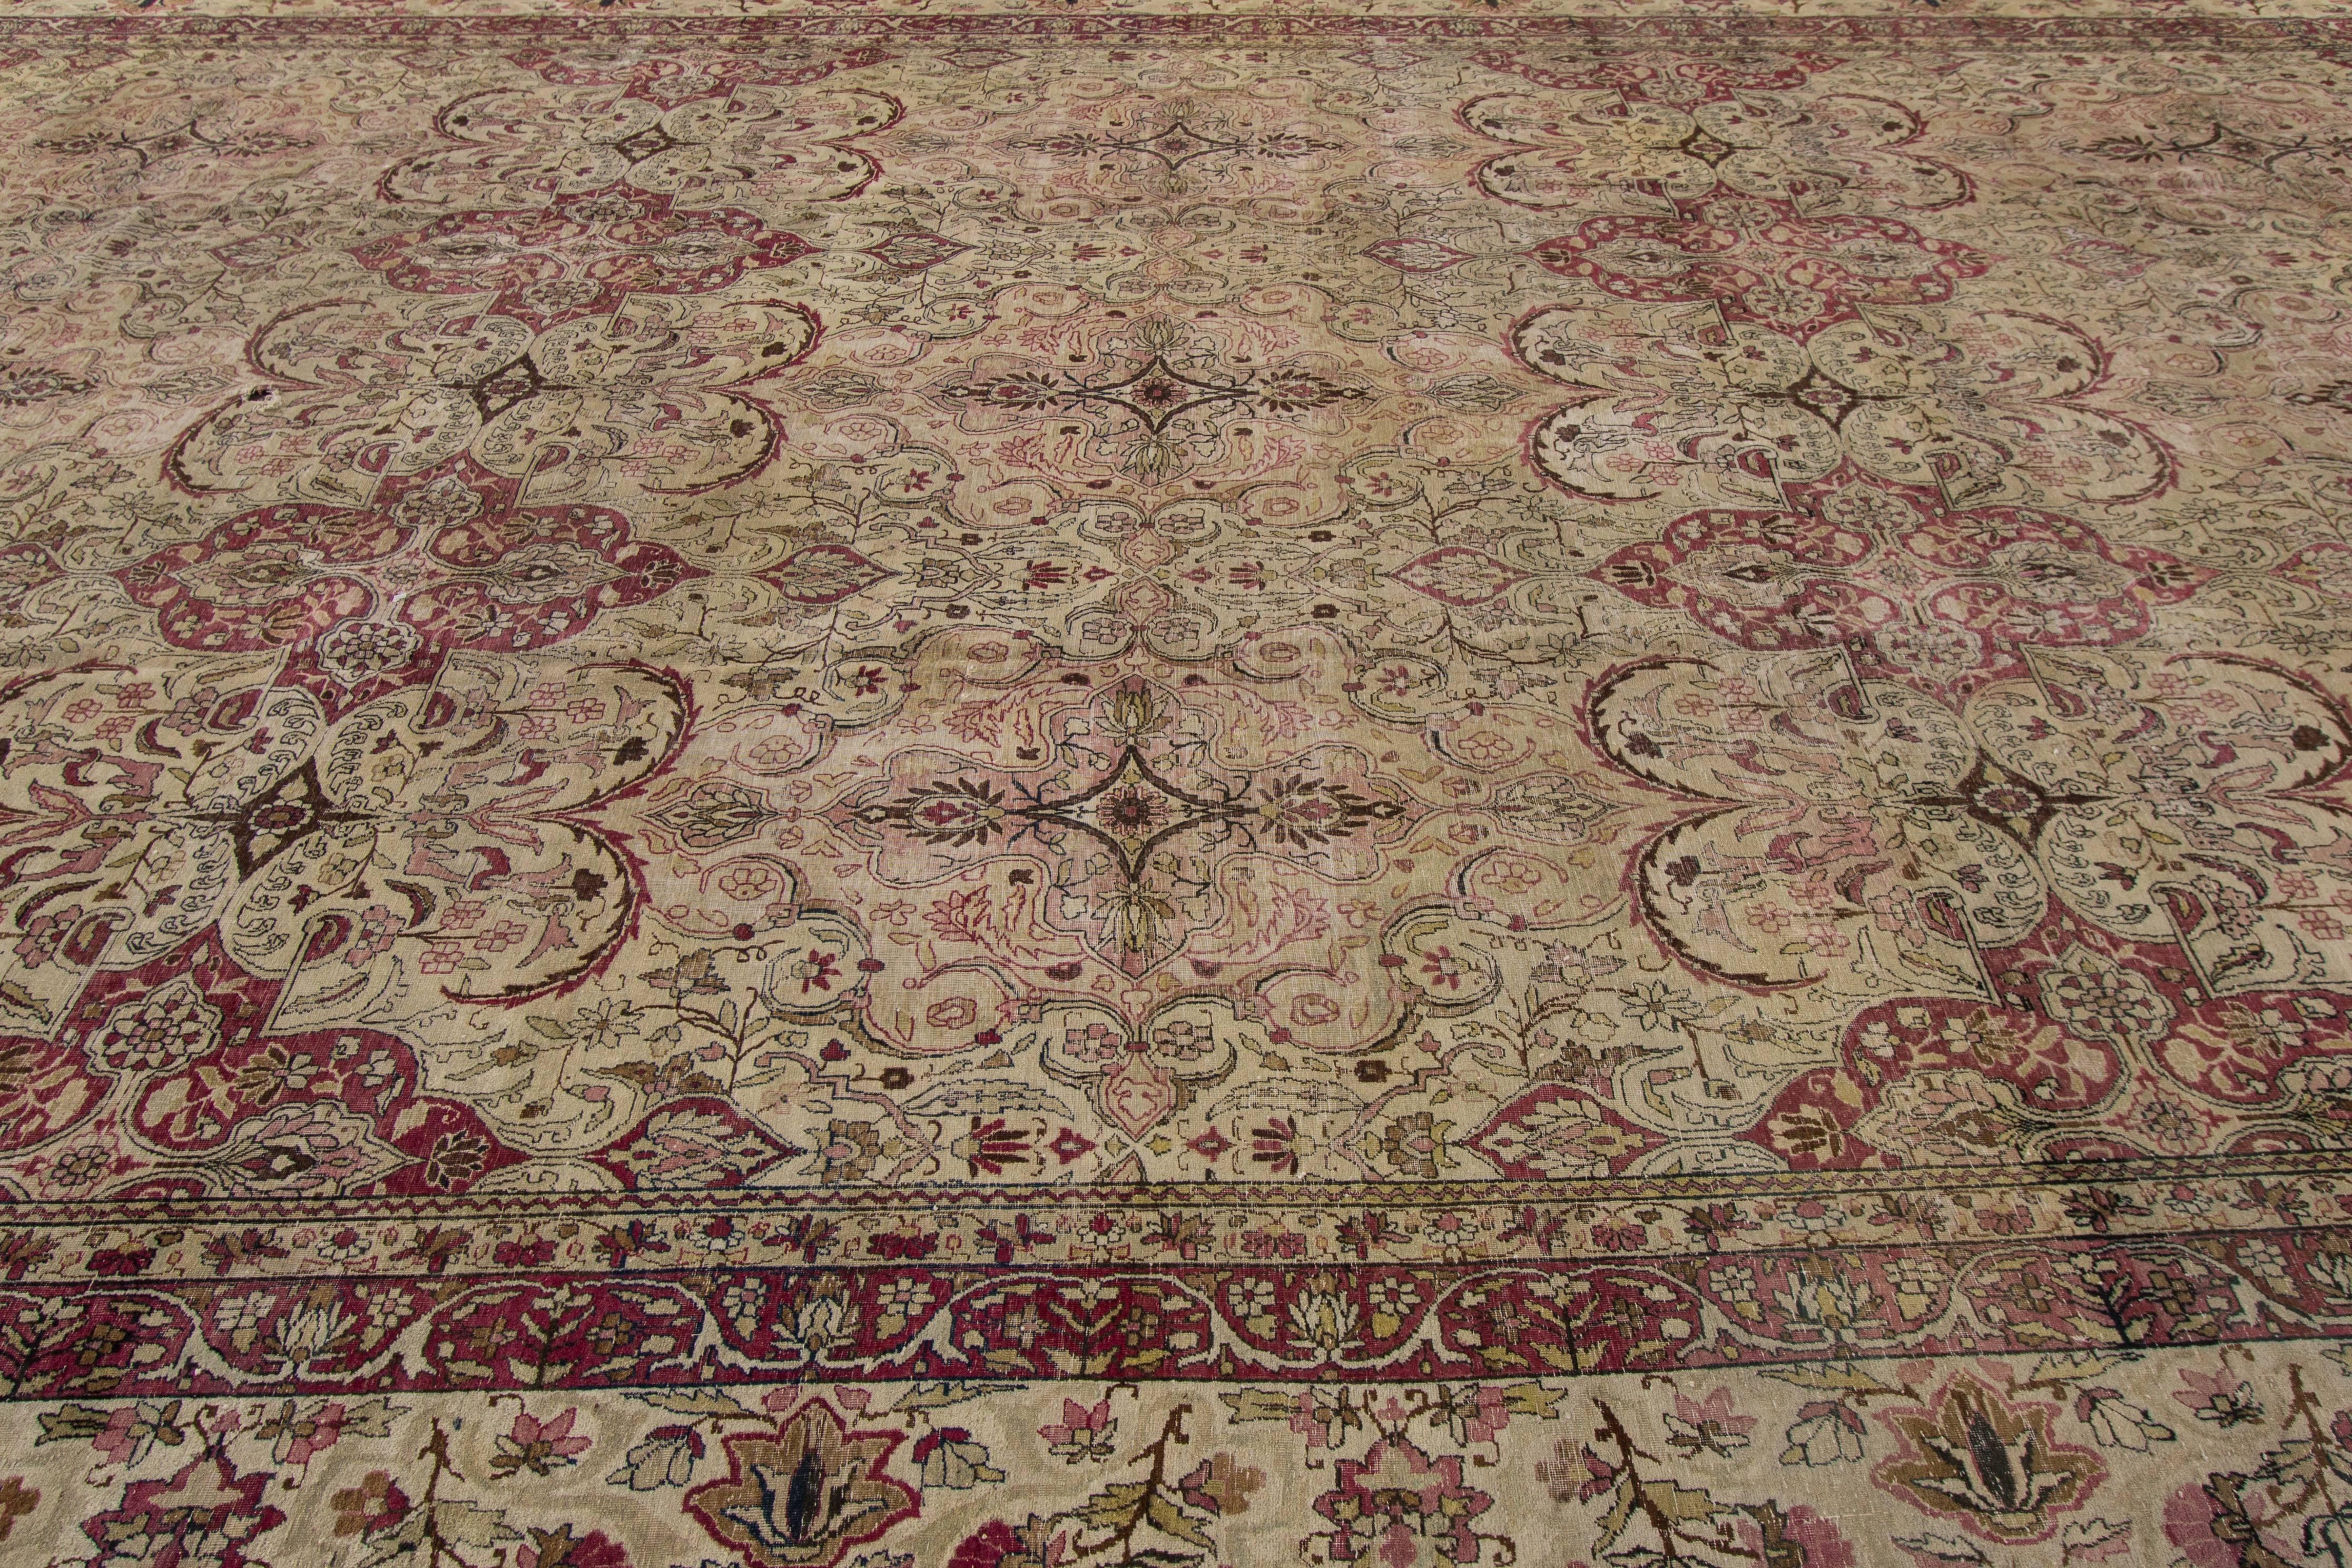 An antique Persian Kerman carpet from the last quarter of the 19th century. Measures: 11'10